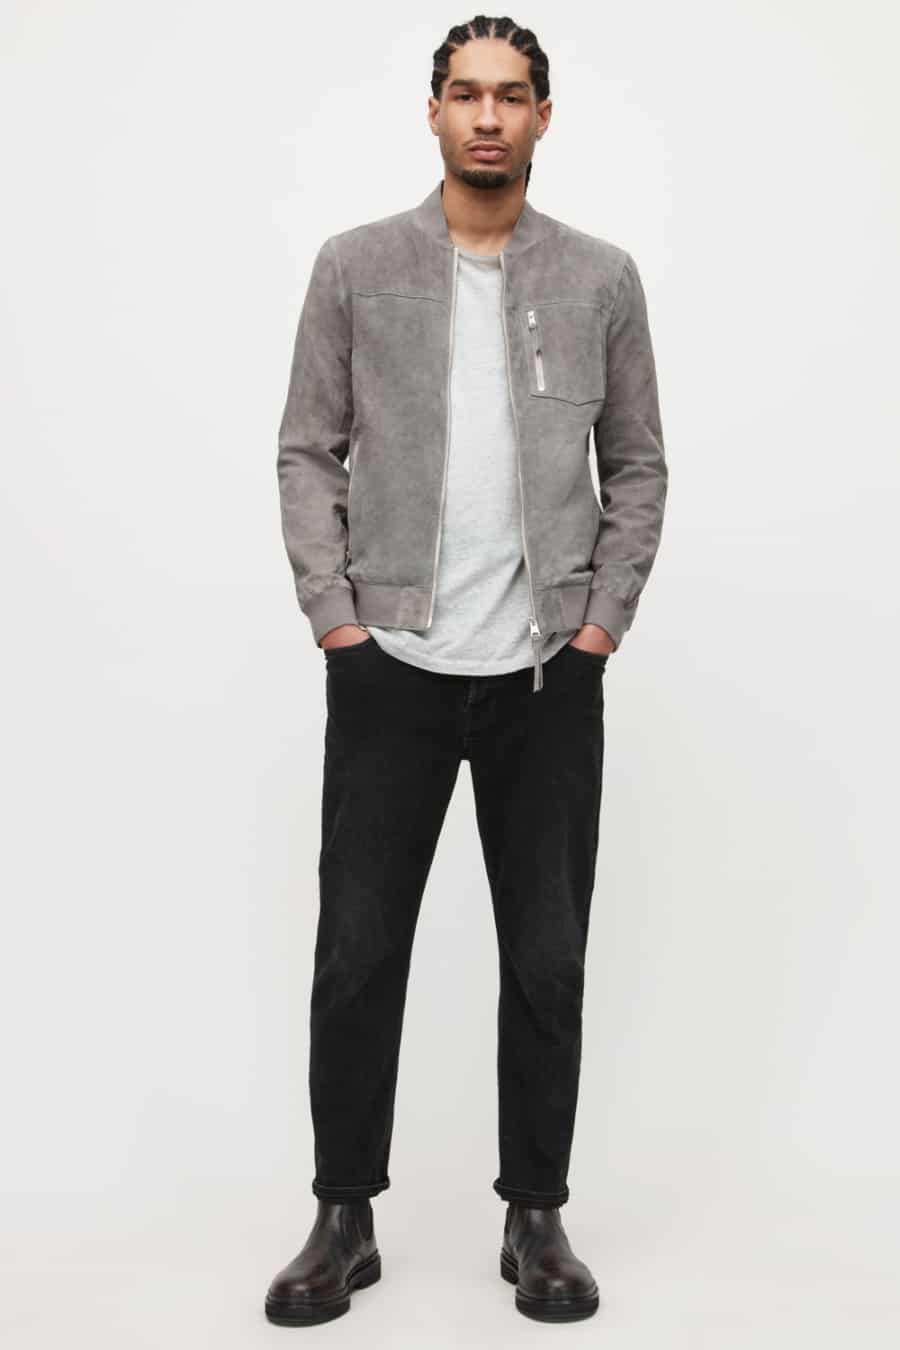 Men's black jeans, light grey T-shirt, grey suede bomber jacket and brown Chelsea boots outfit